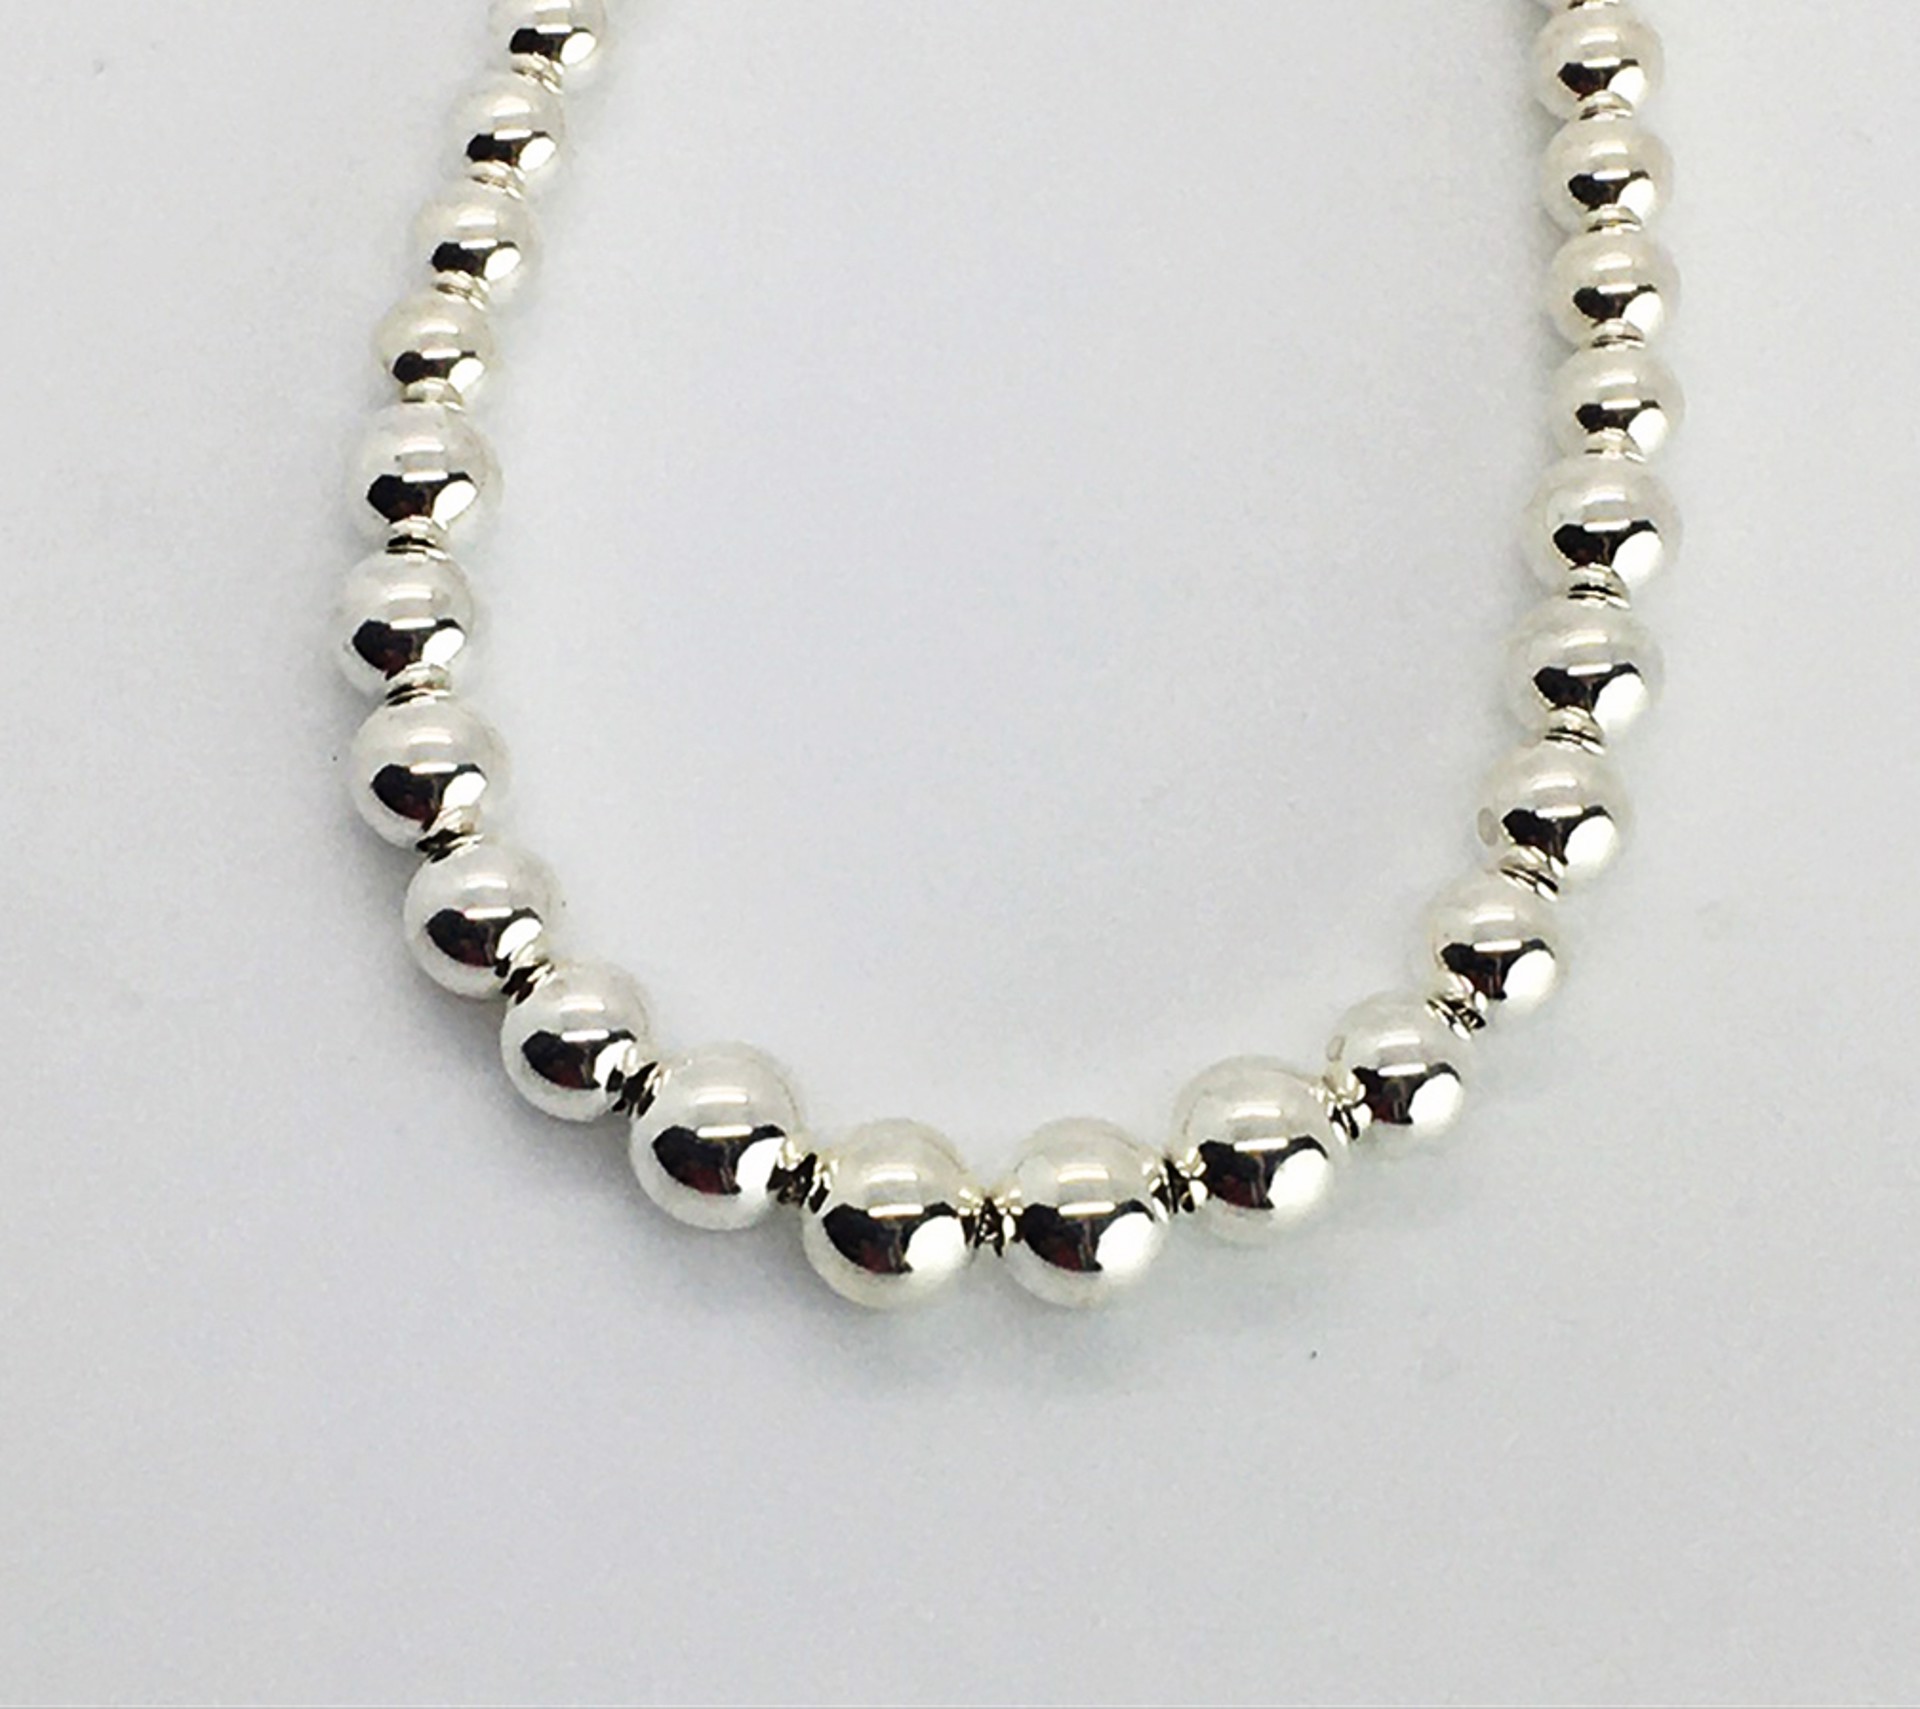  17" Graduated Sterling Silver Beaded Necklace - 6-8mm by Suzanne Woodworth